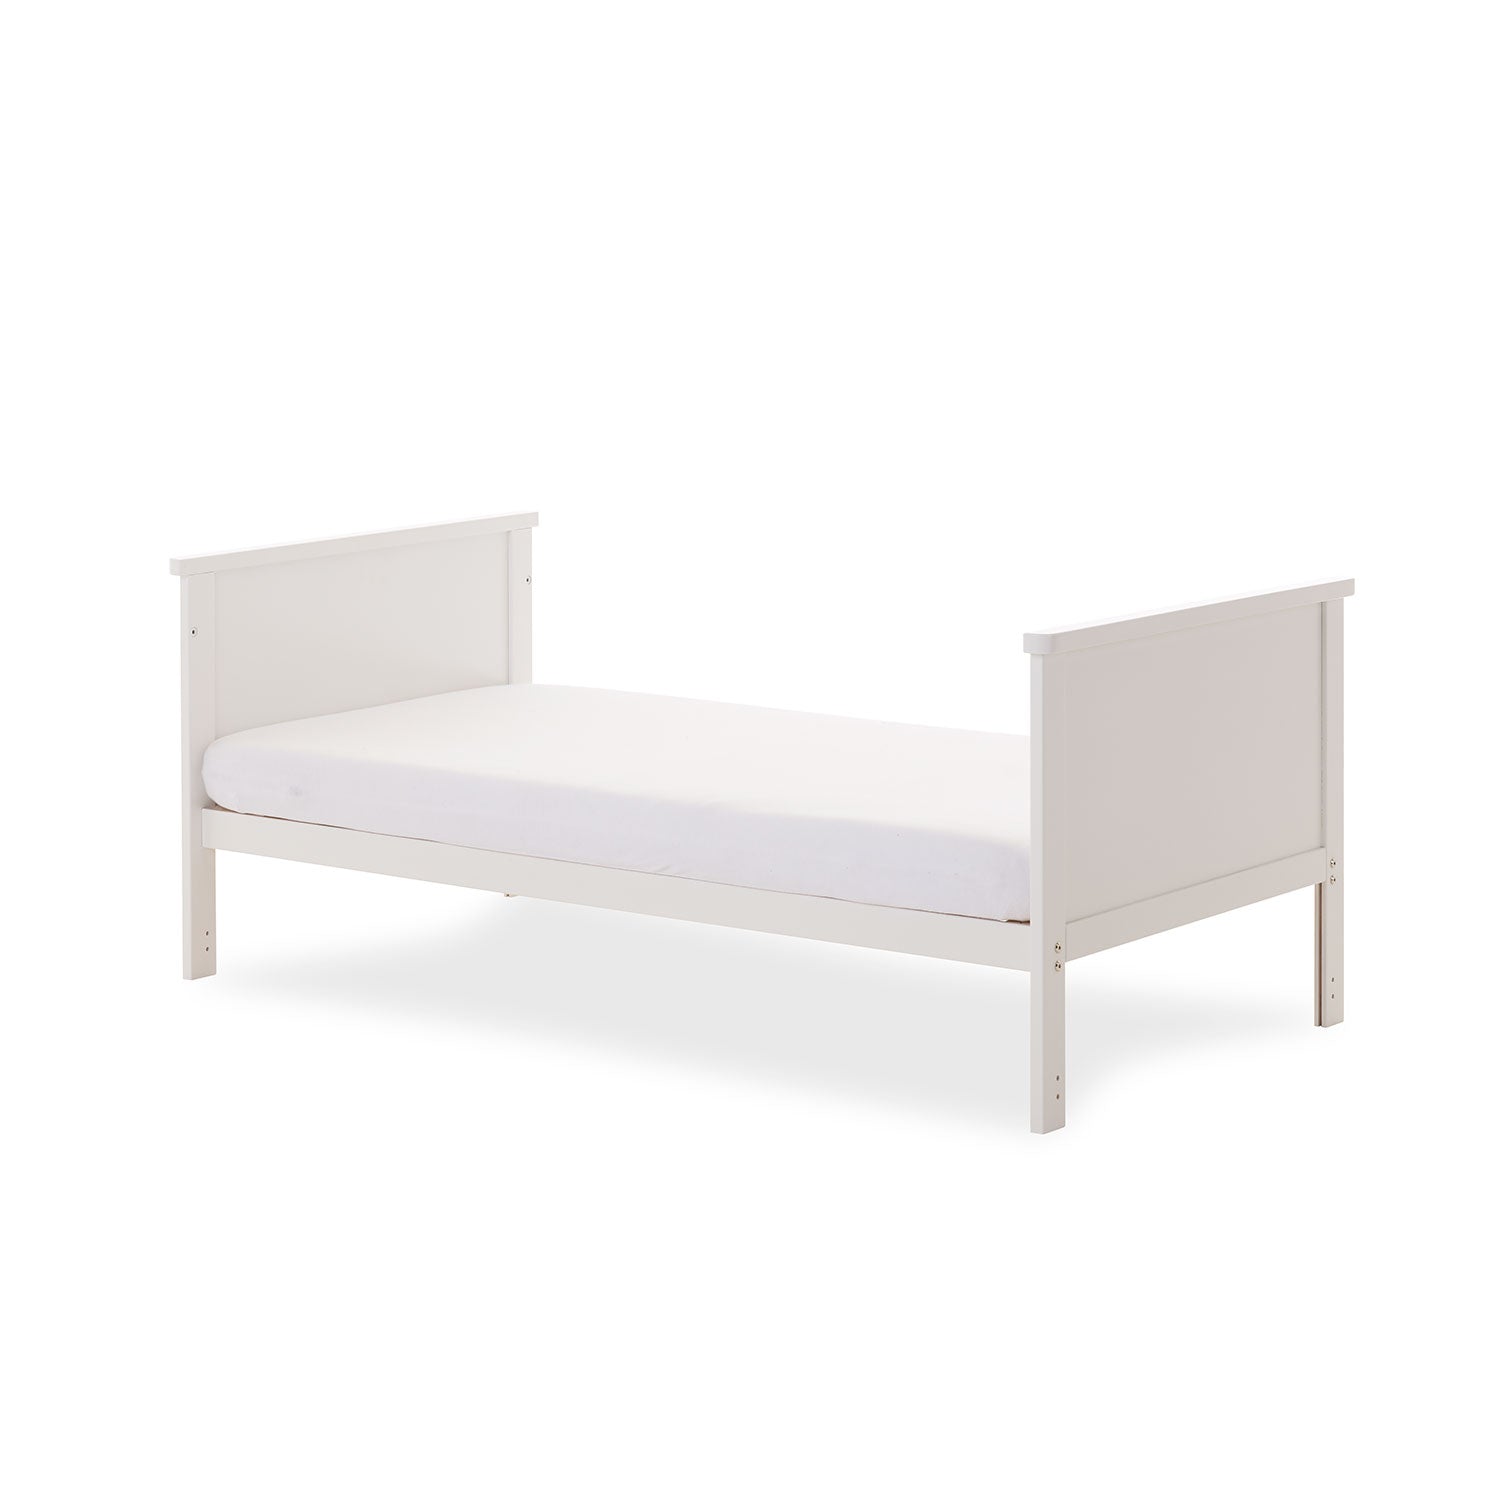 Evie Cot Bed - White